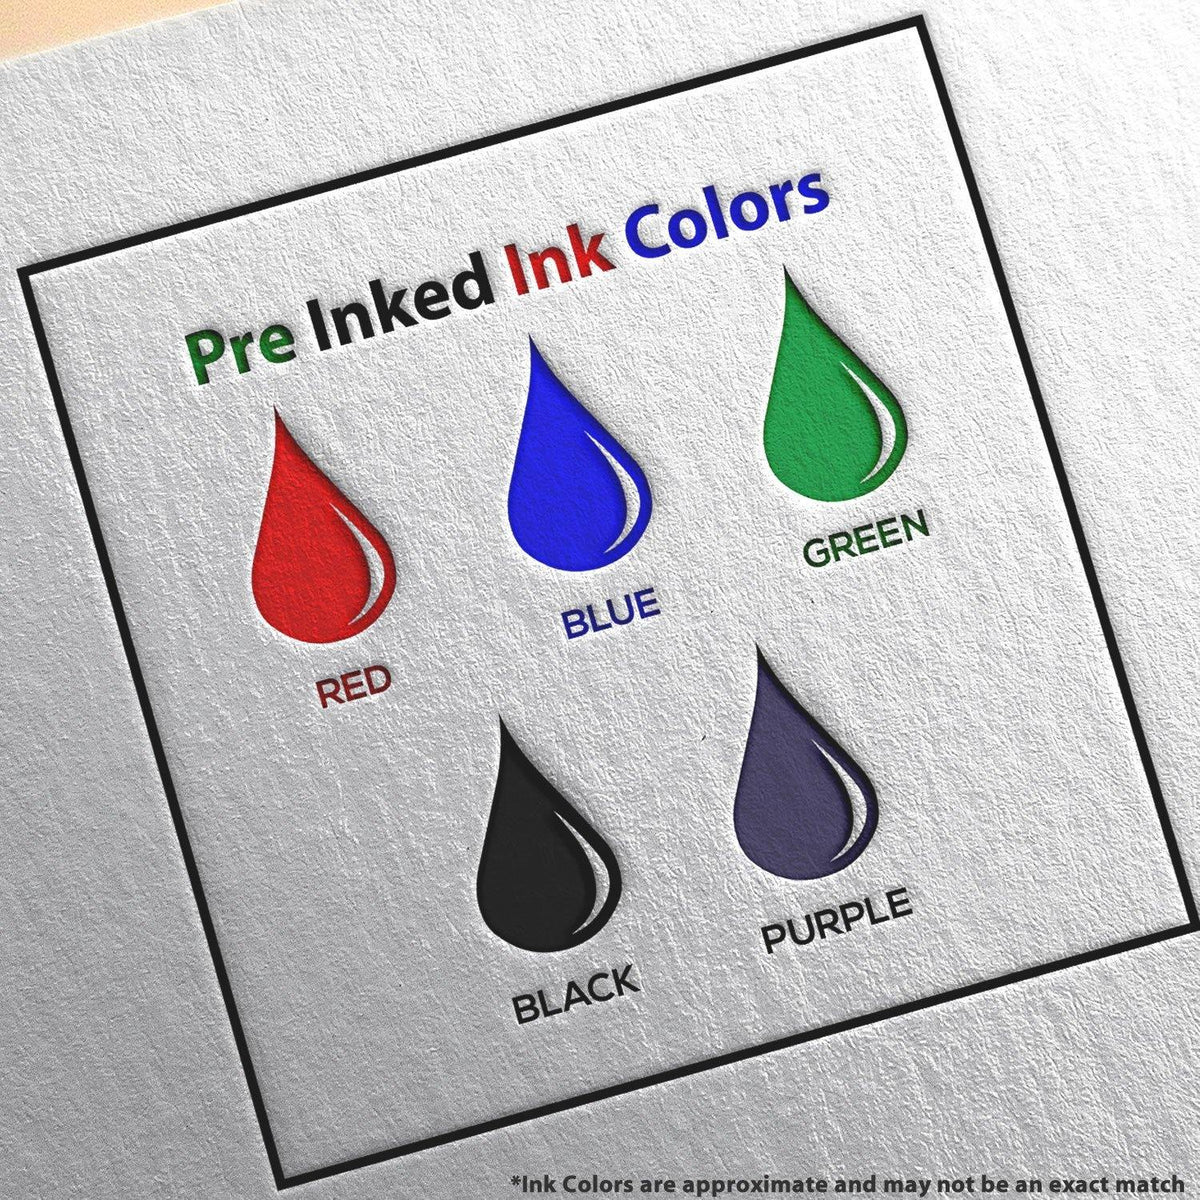 Slim Pre-Inked Please Pay Now No Statements Stamp Ink Color Options